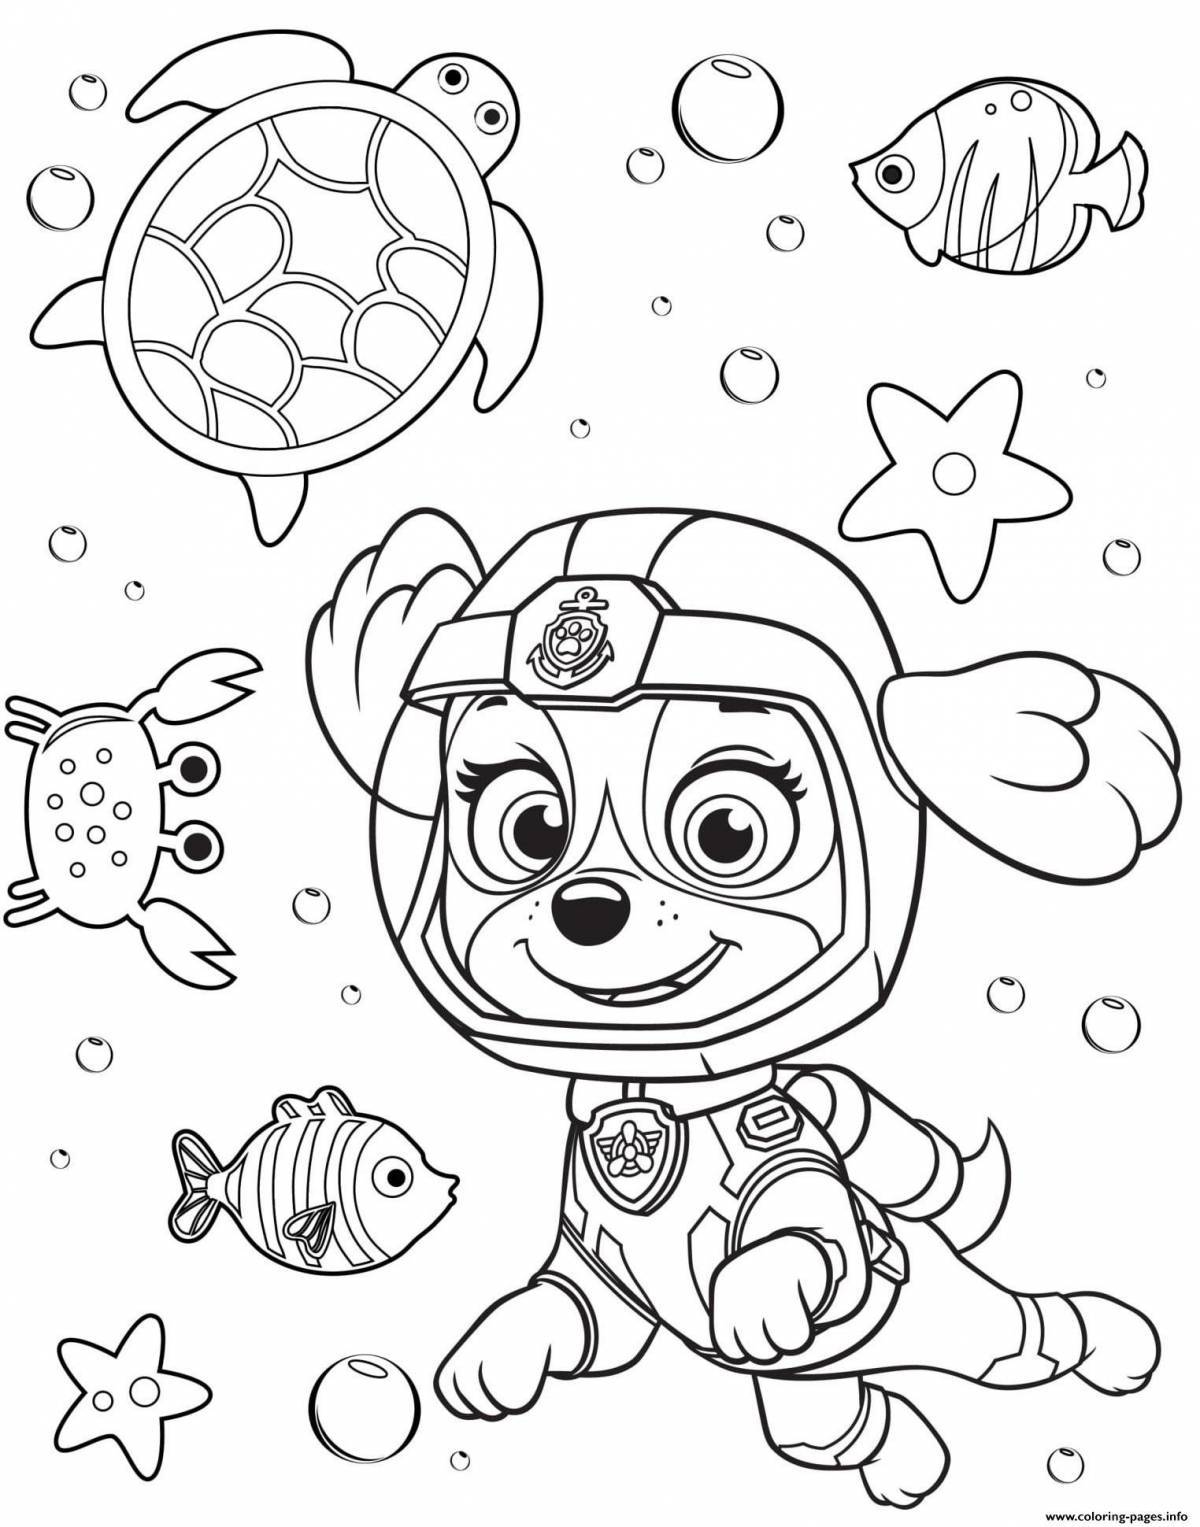 Charming paw patrol coloring book new